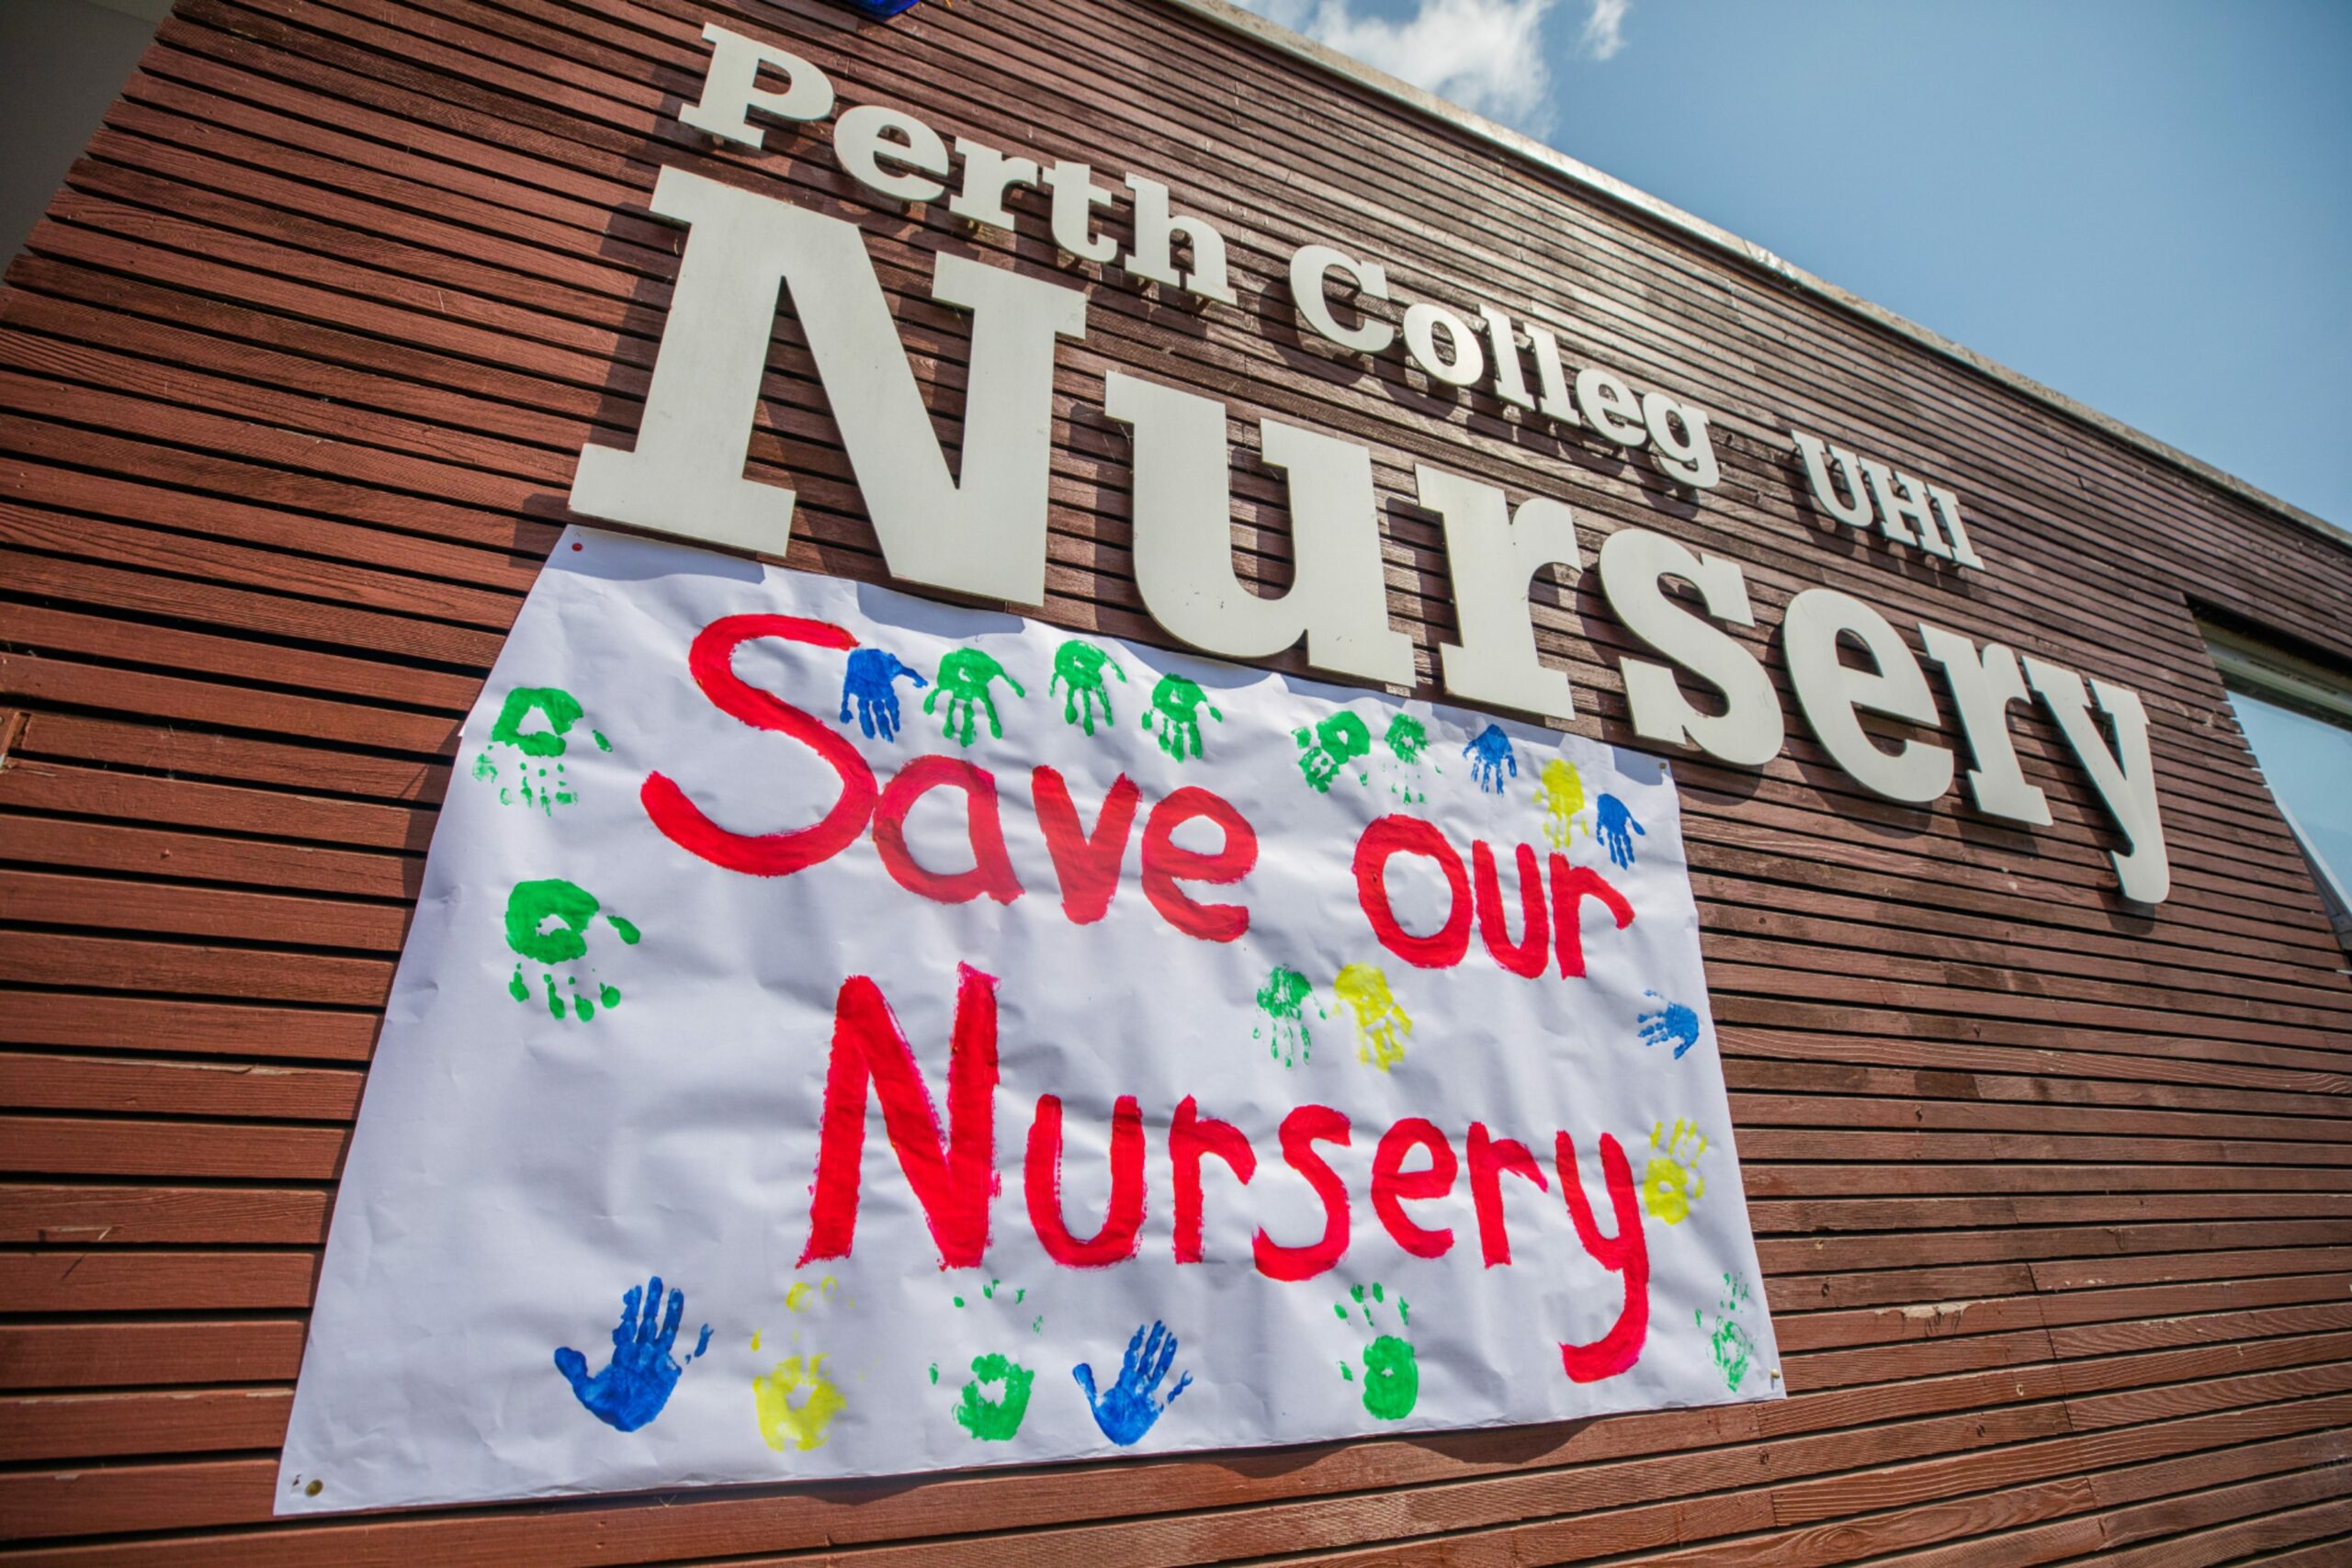 Protest sign at UHI Perth nursery.